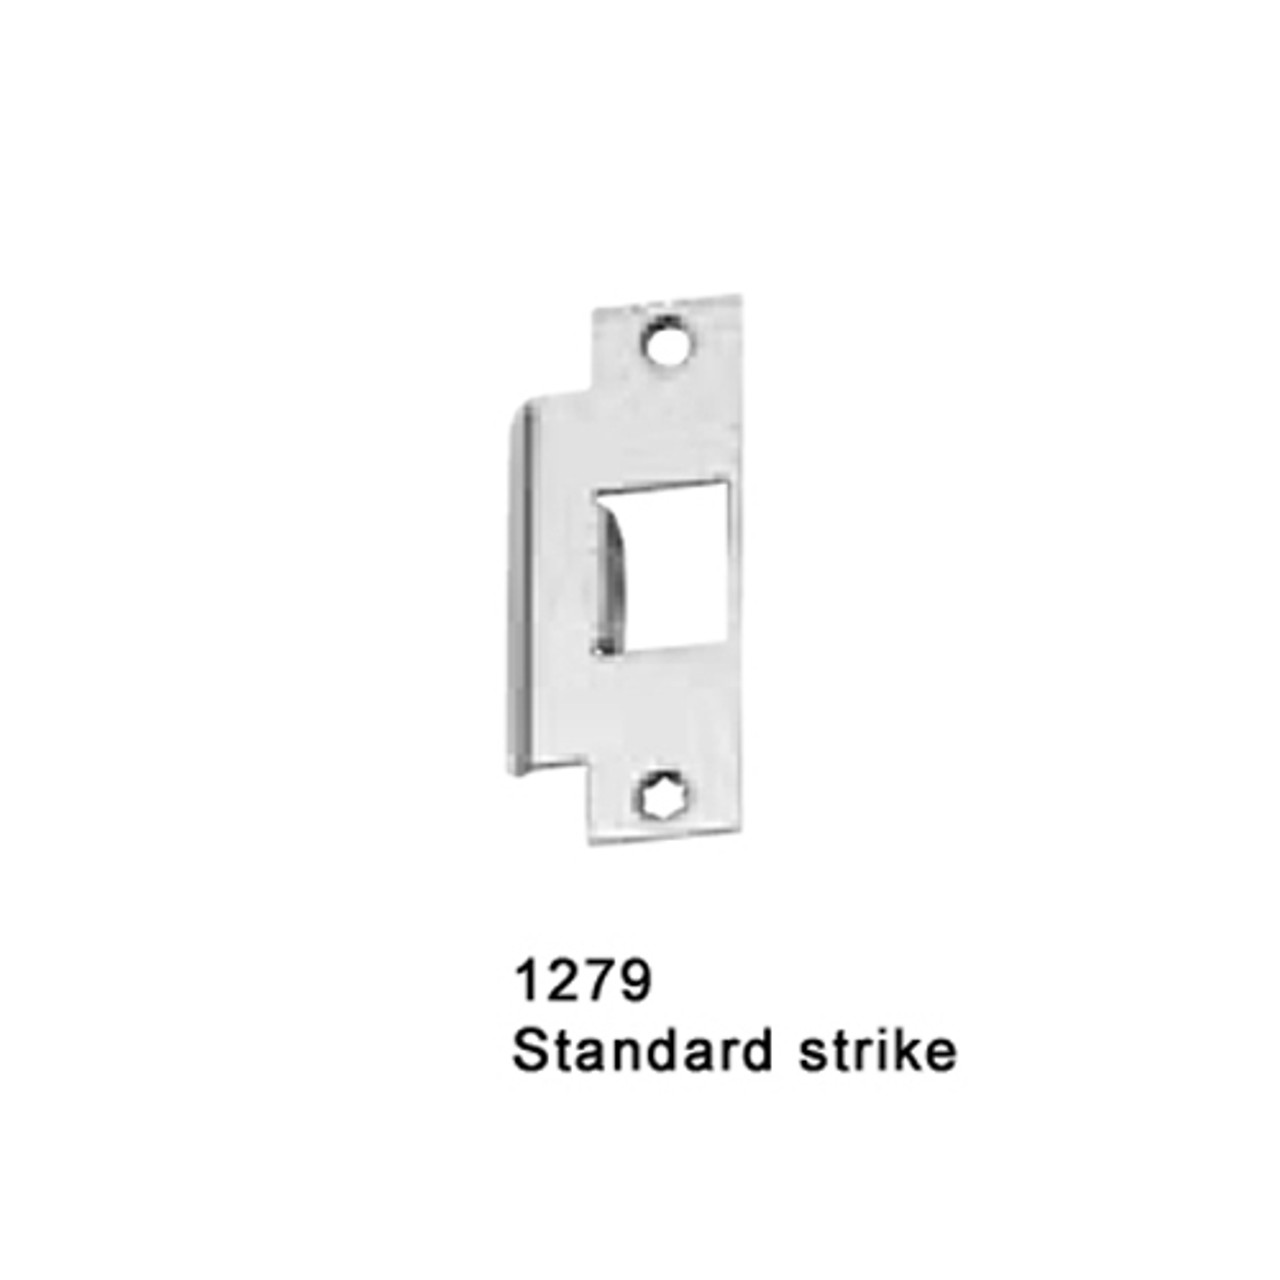 CD25-M-DT-US28-4-RHR Falcon 25 Series Mortise Lock Devices with 512DT Dummy Trim in Anodized Aluminum